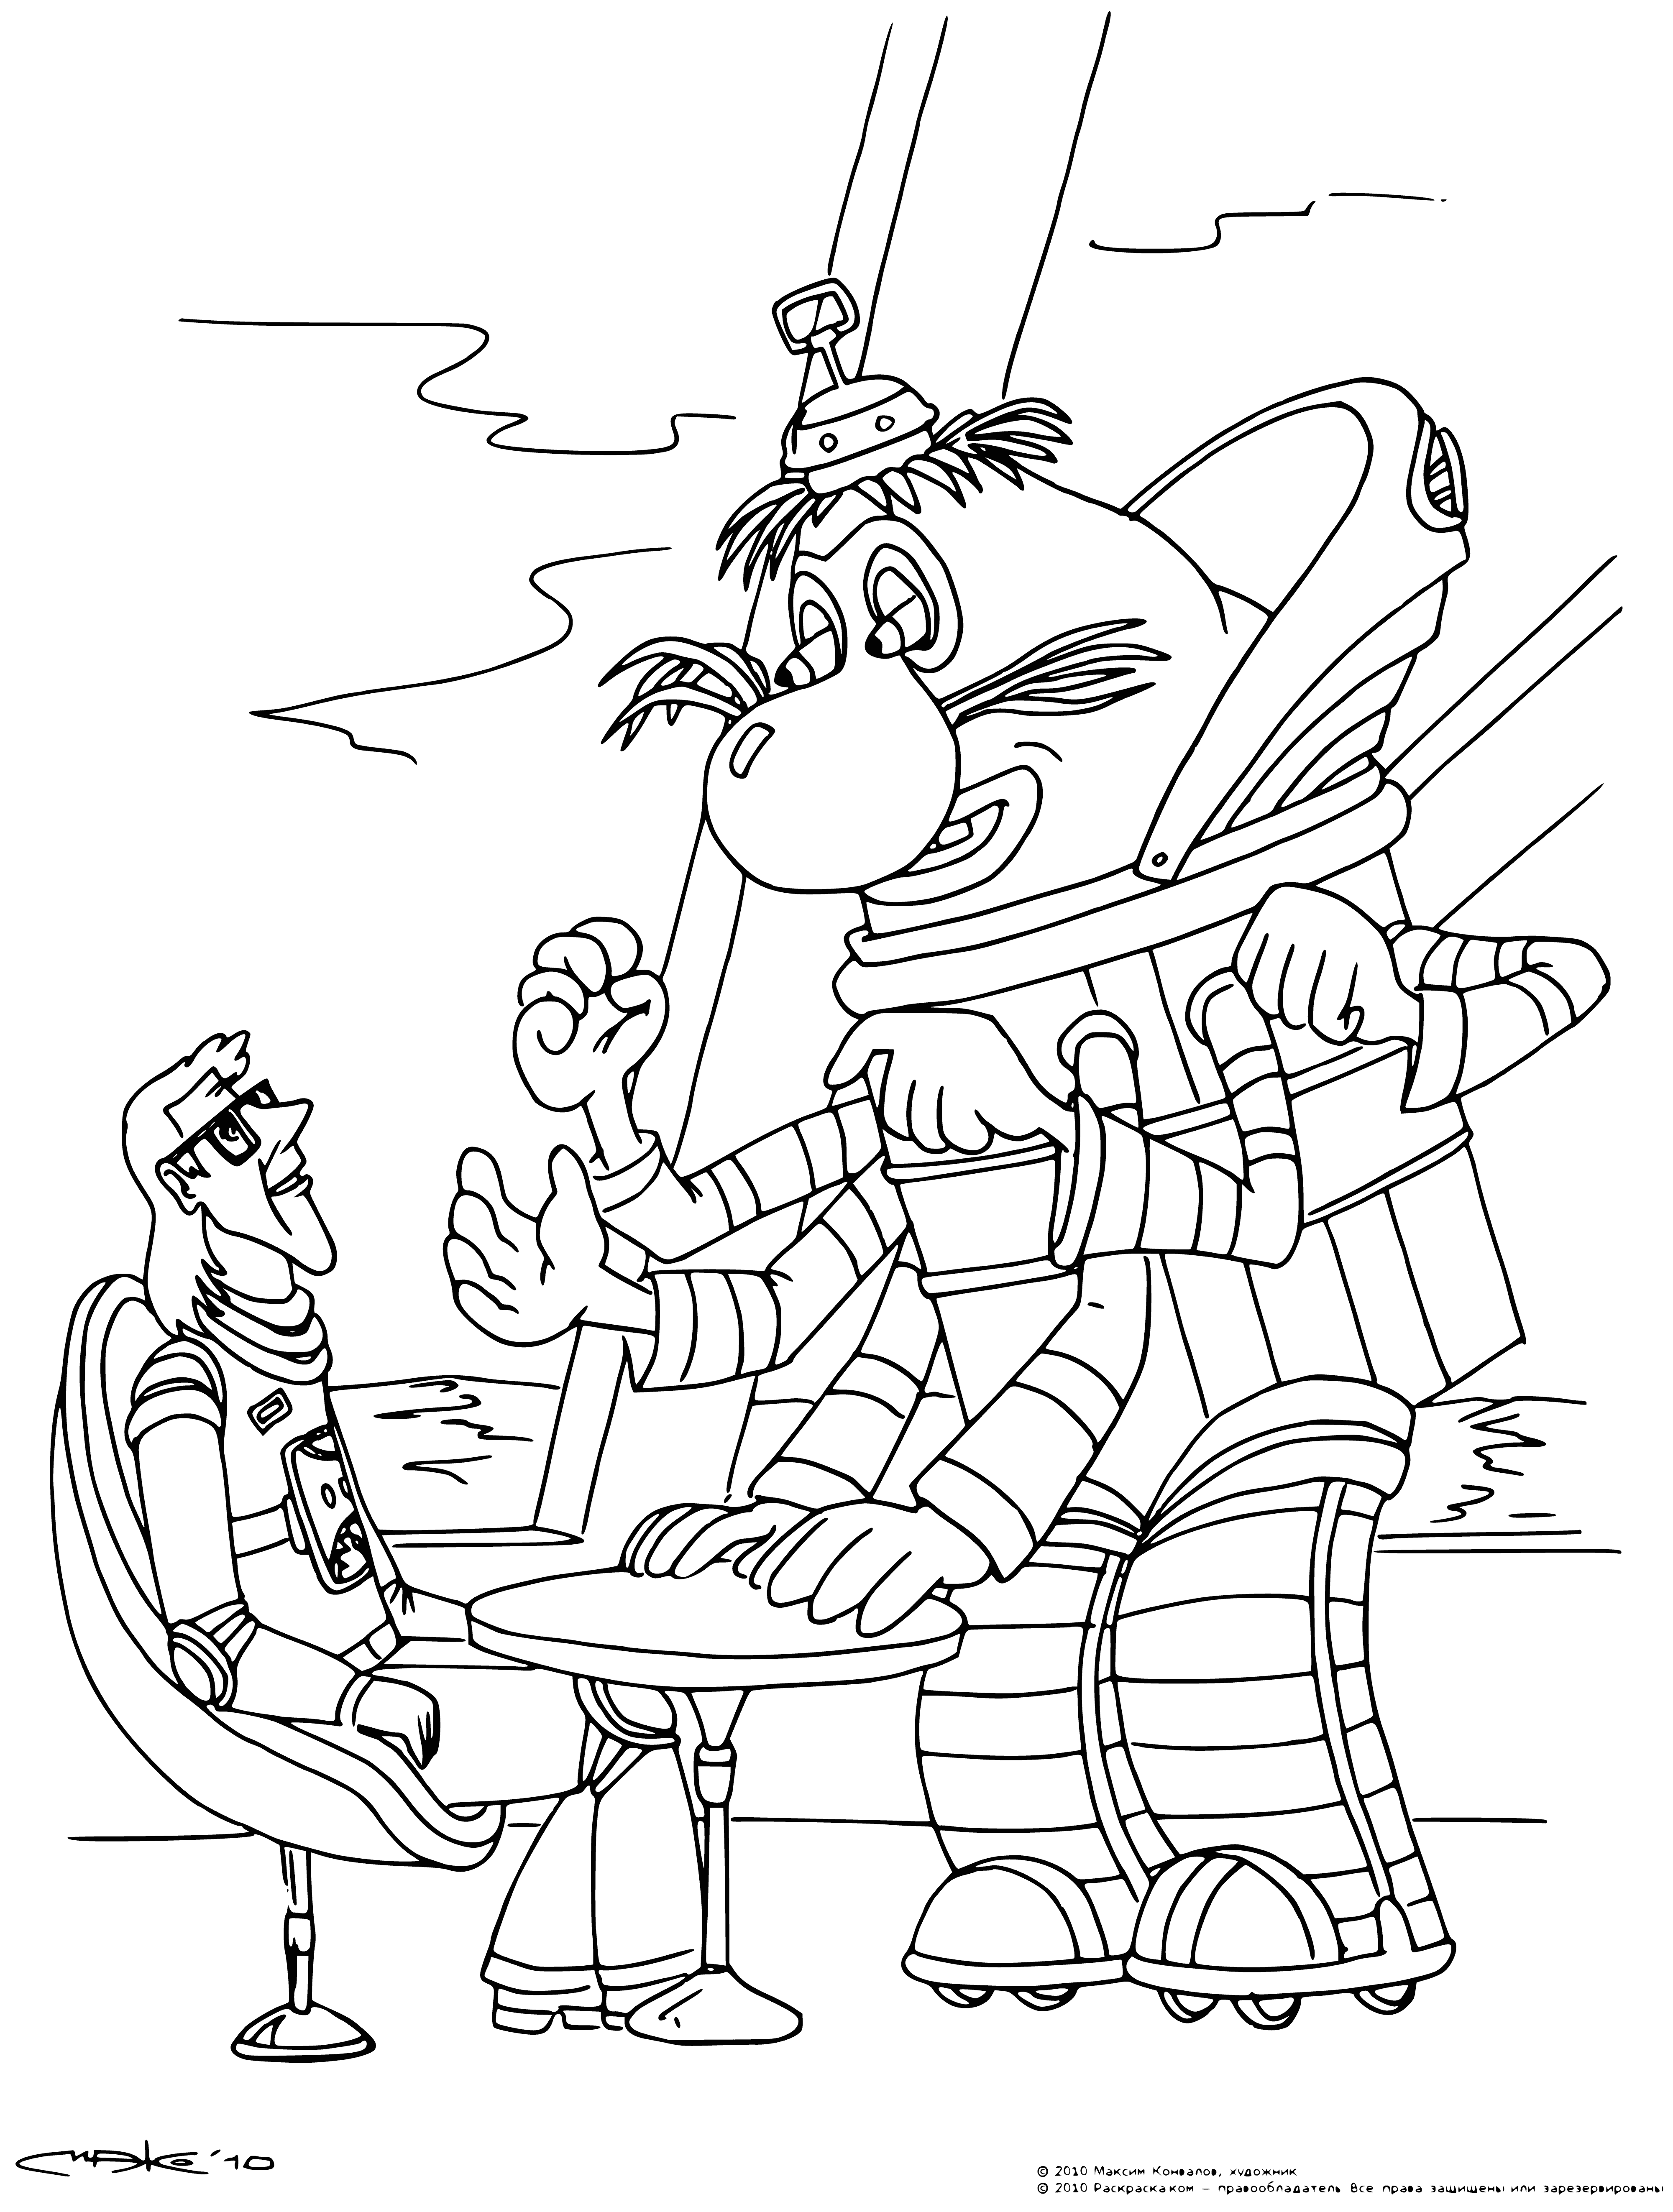 coloring page: Group of 3 spacemen explore giant blue ball surrounded by ring of orange spheres & faint yellowish nebula; one shines blue light.